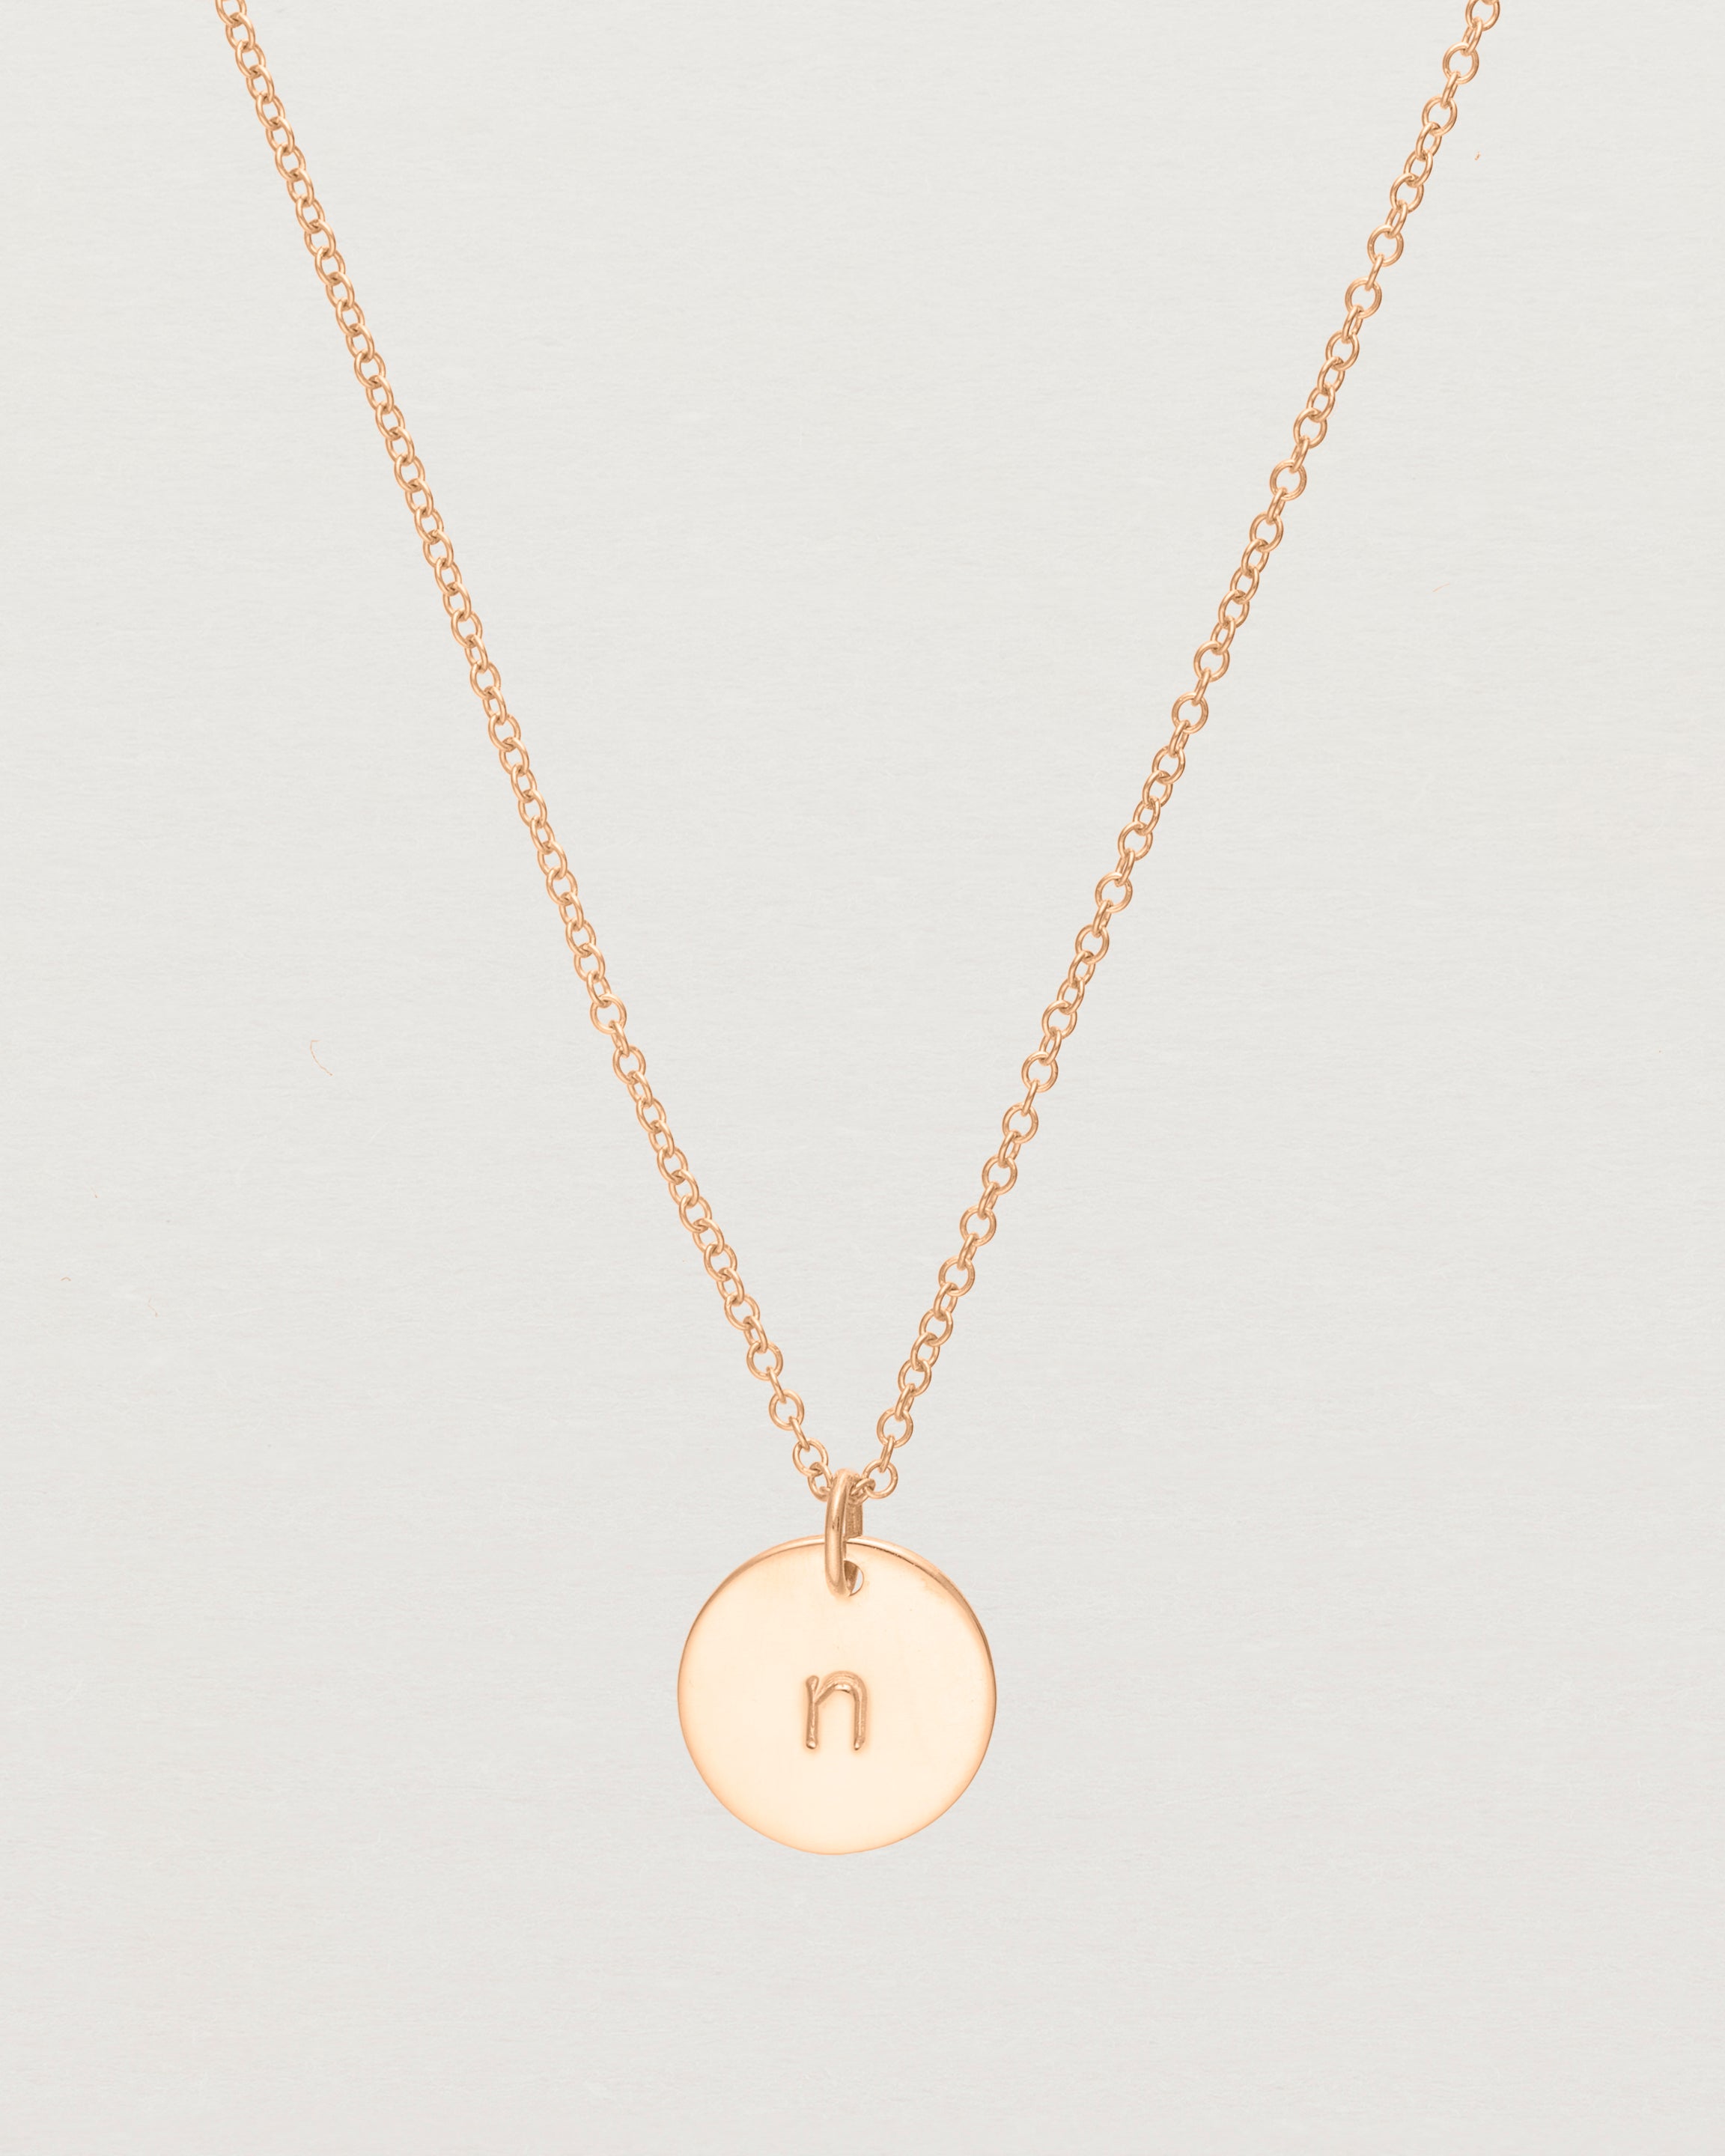 Close up of the Mini Initial Necklace in Rose Gold.